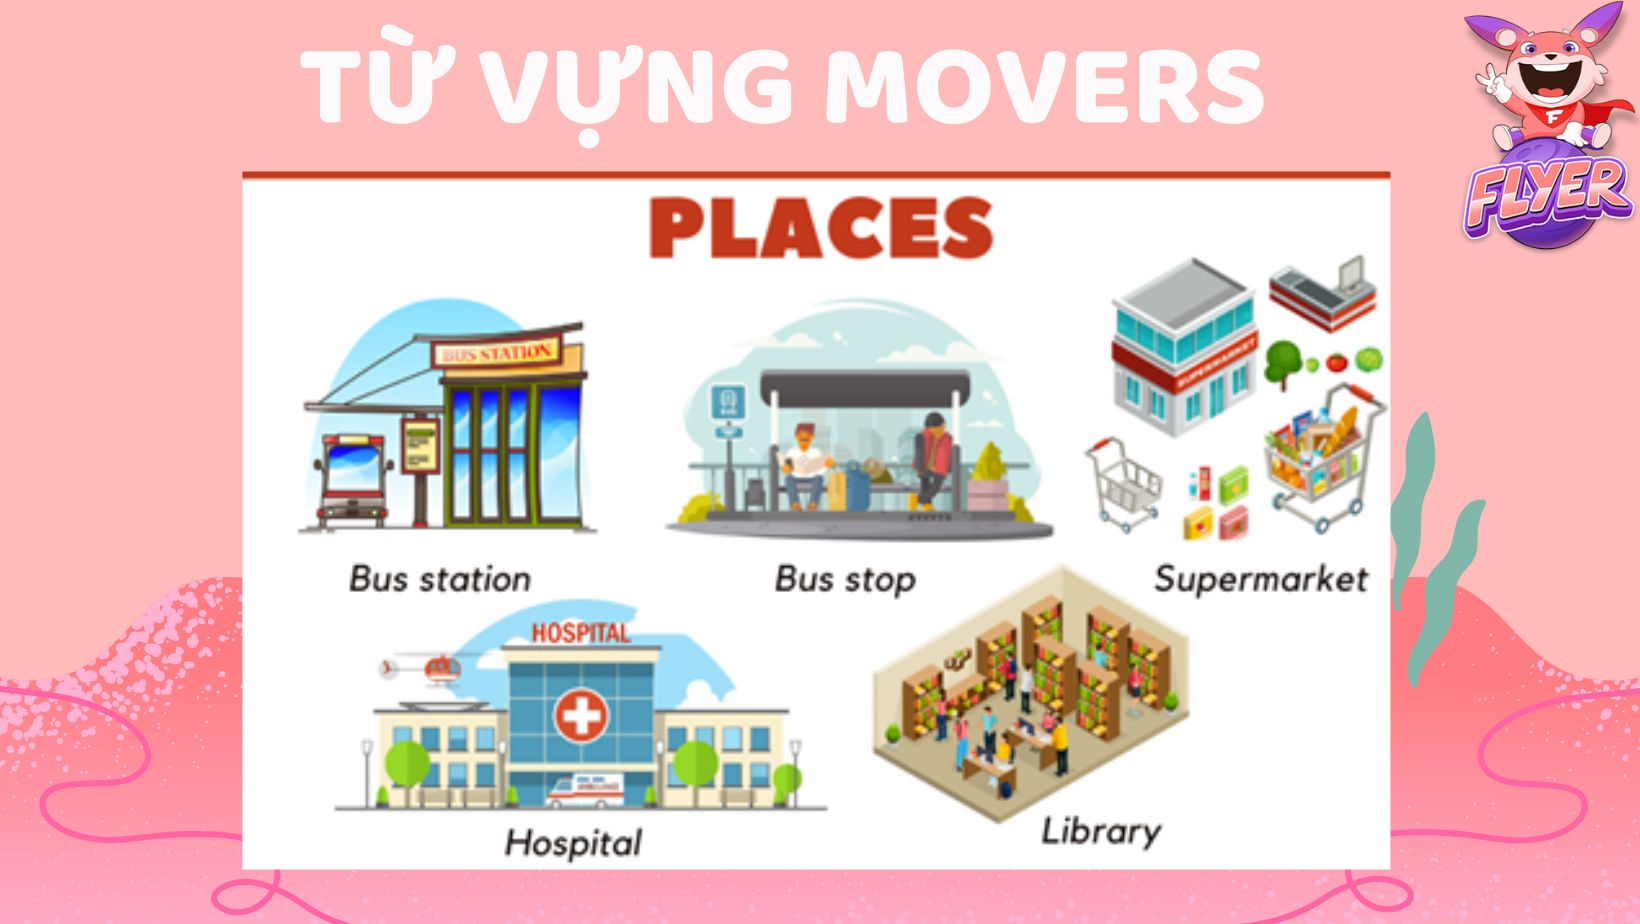 Từ vựng Movers Cambridge chủ đề Places & directions